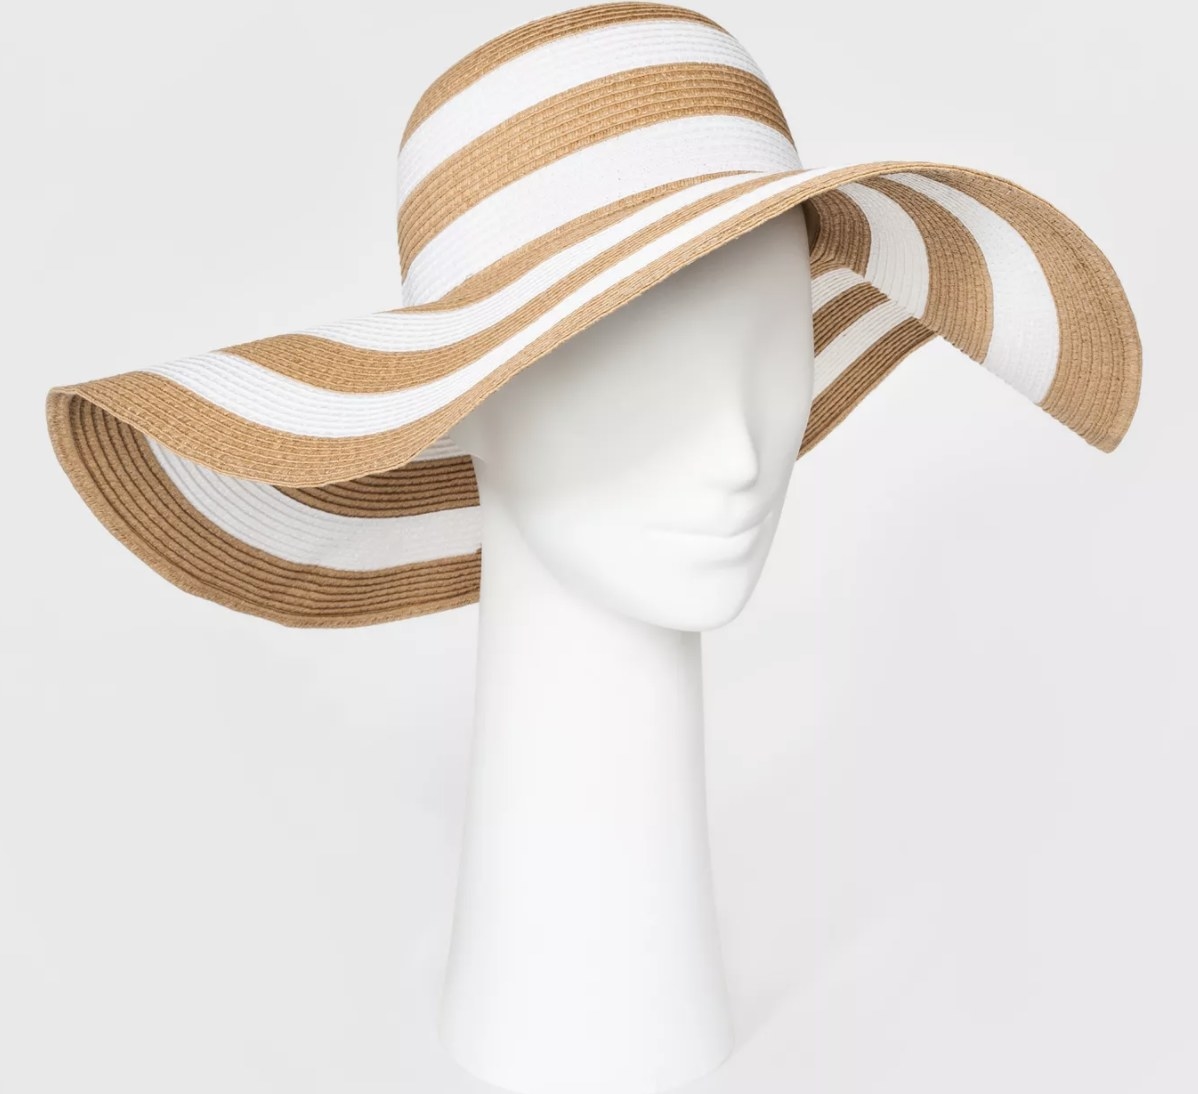 The white and brown striped straw hat